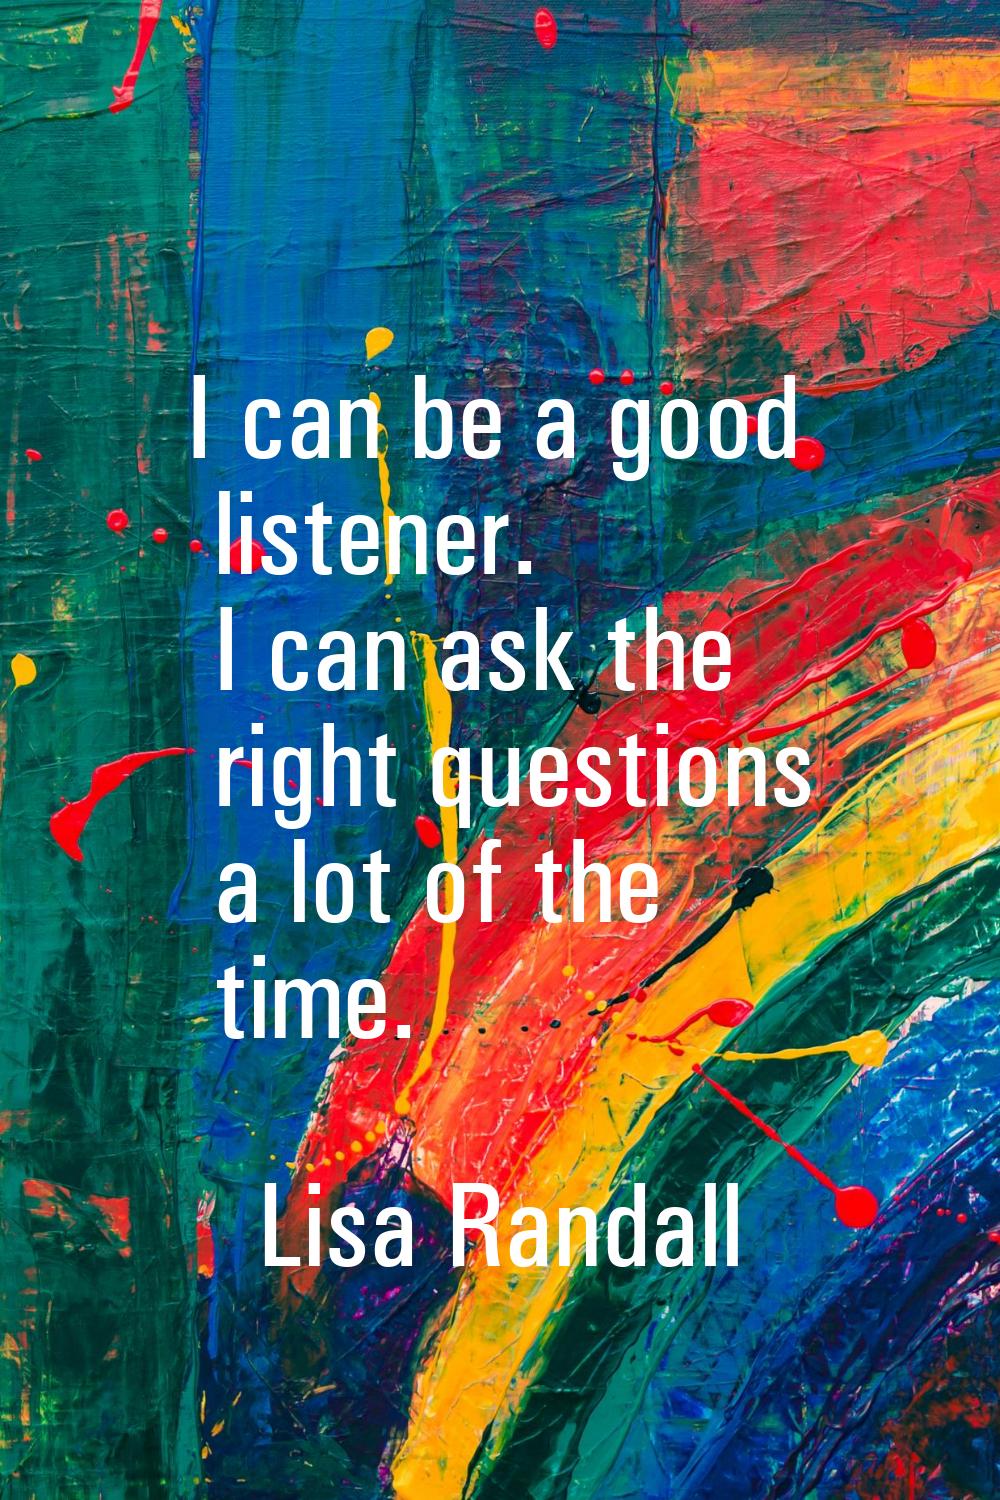 I can be a good listener. I can ask the right questions a lot of the time.